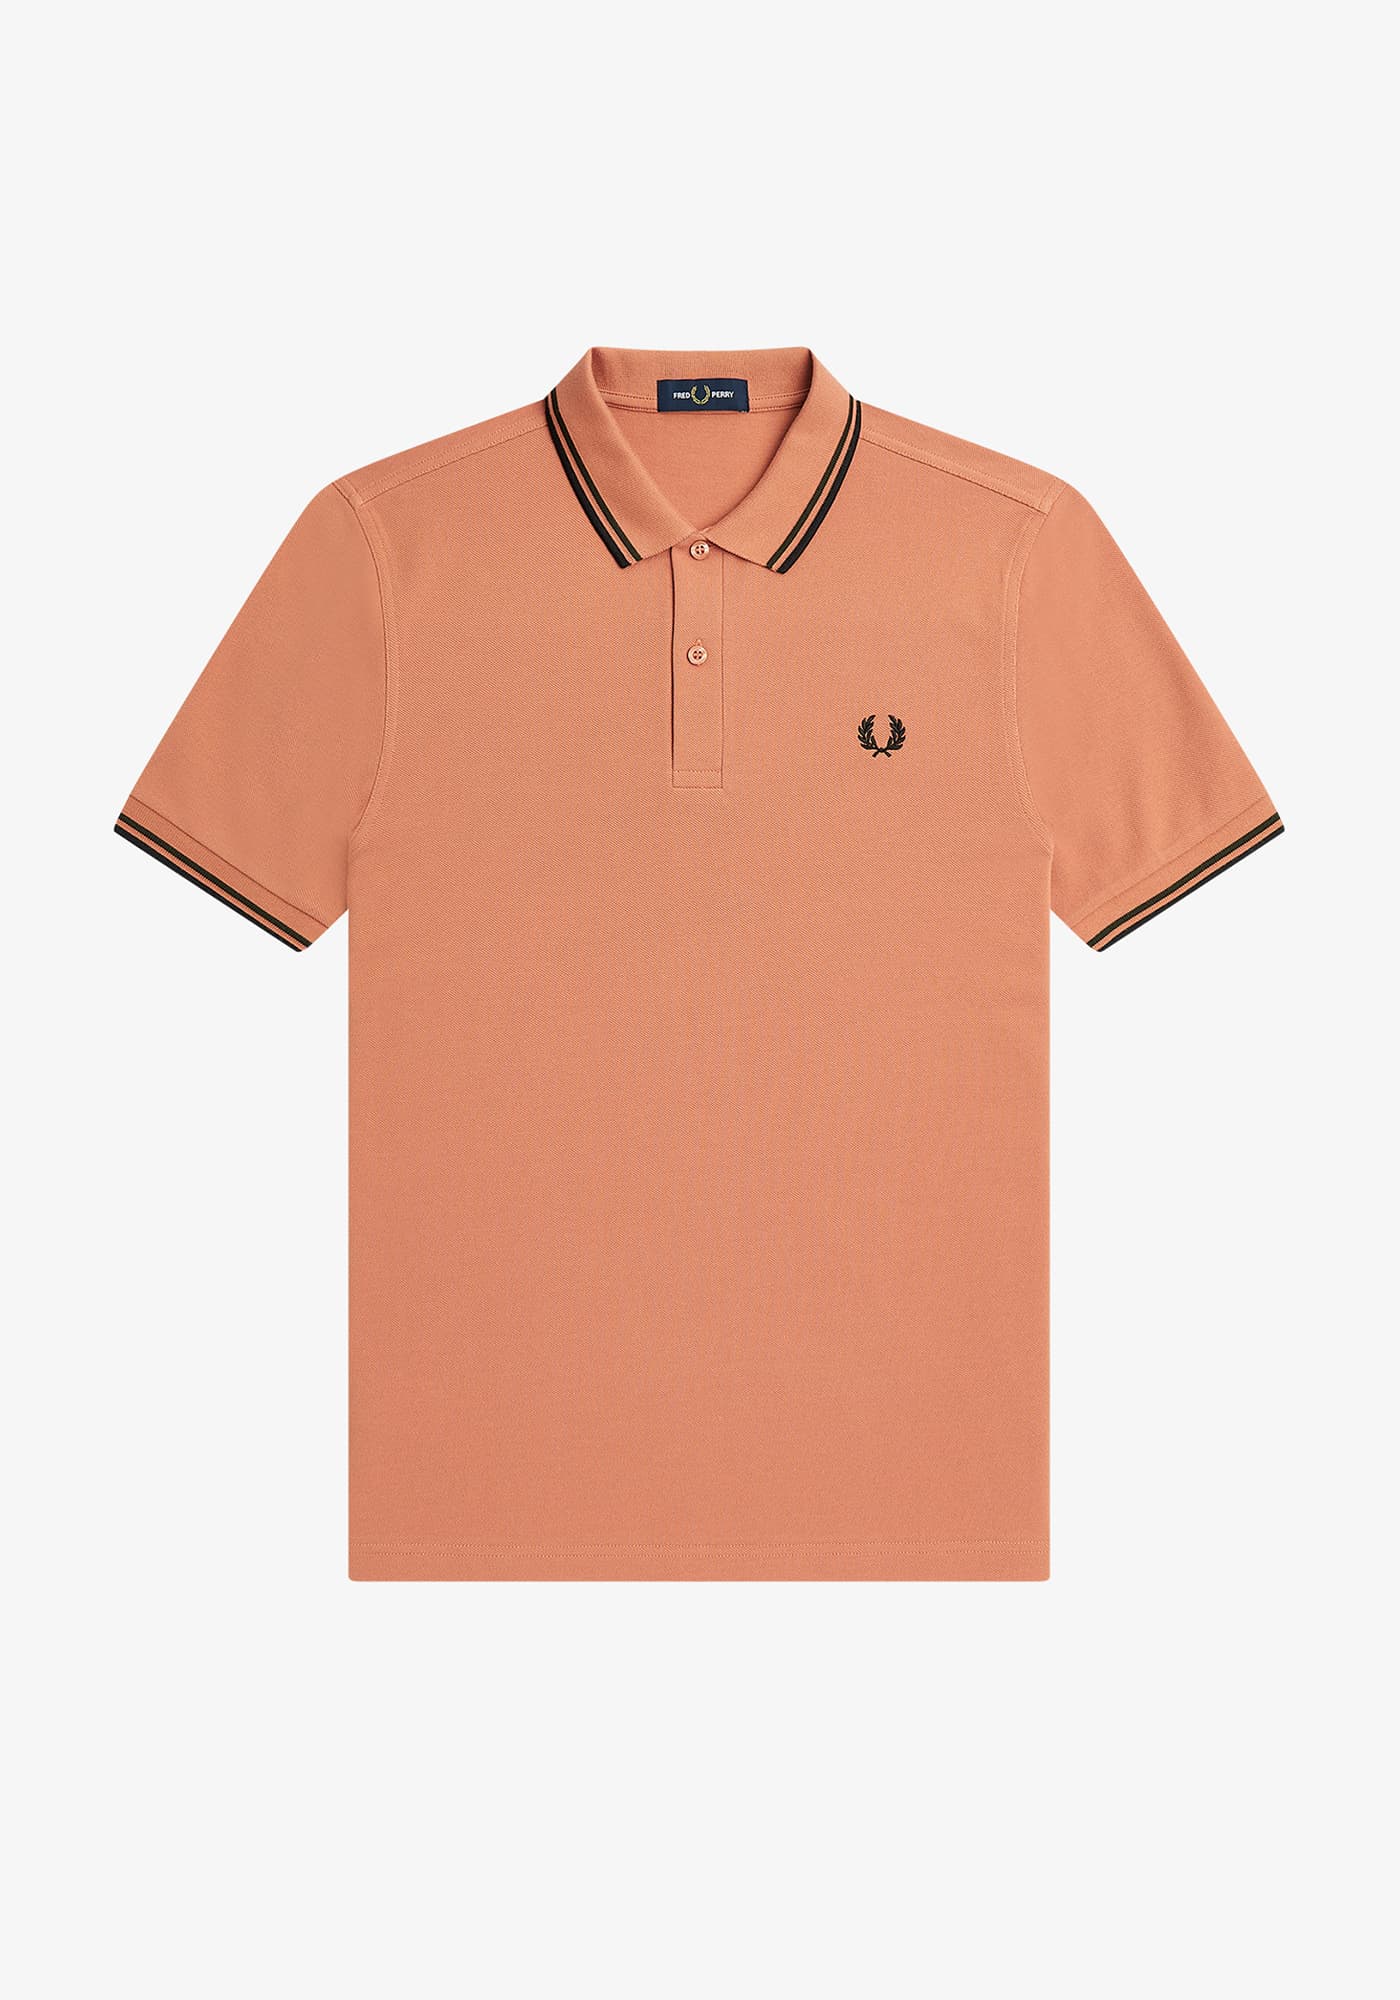 The Fred Perry Shirt - M3600(S 181: LIMESTONE)｜ FRED PERRY｜渋谷 